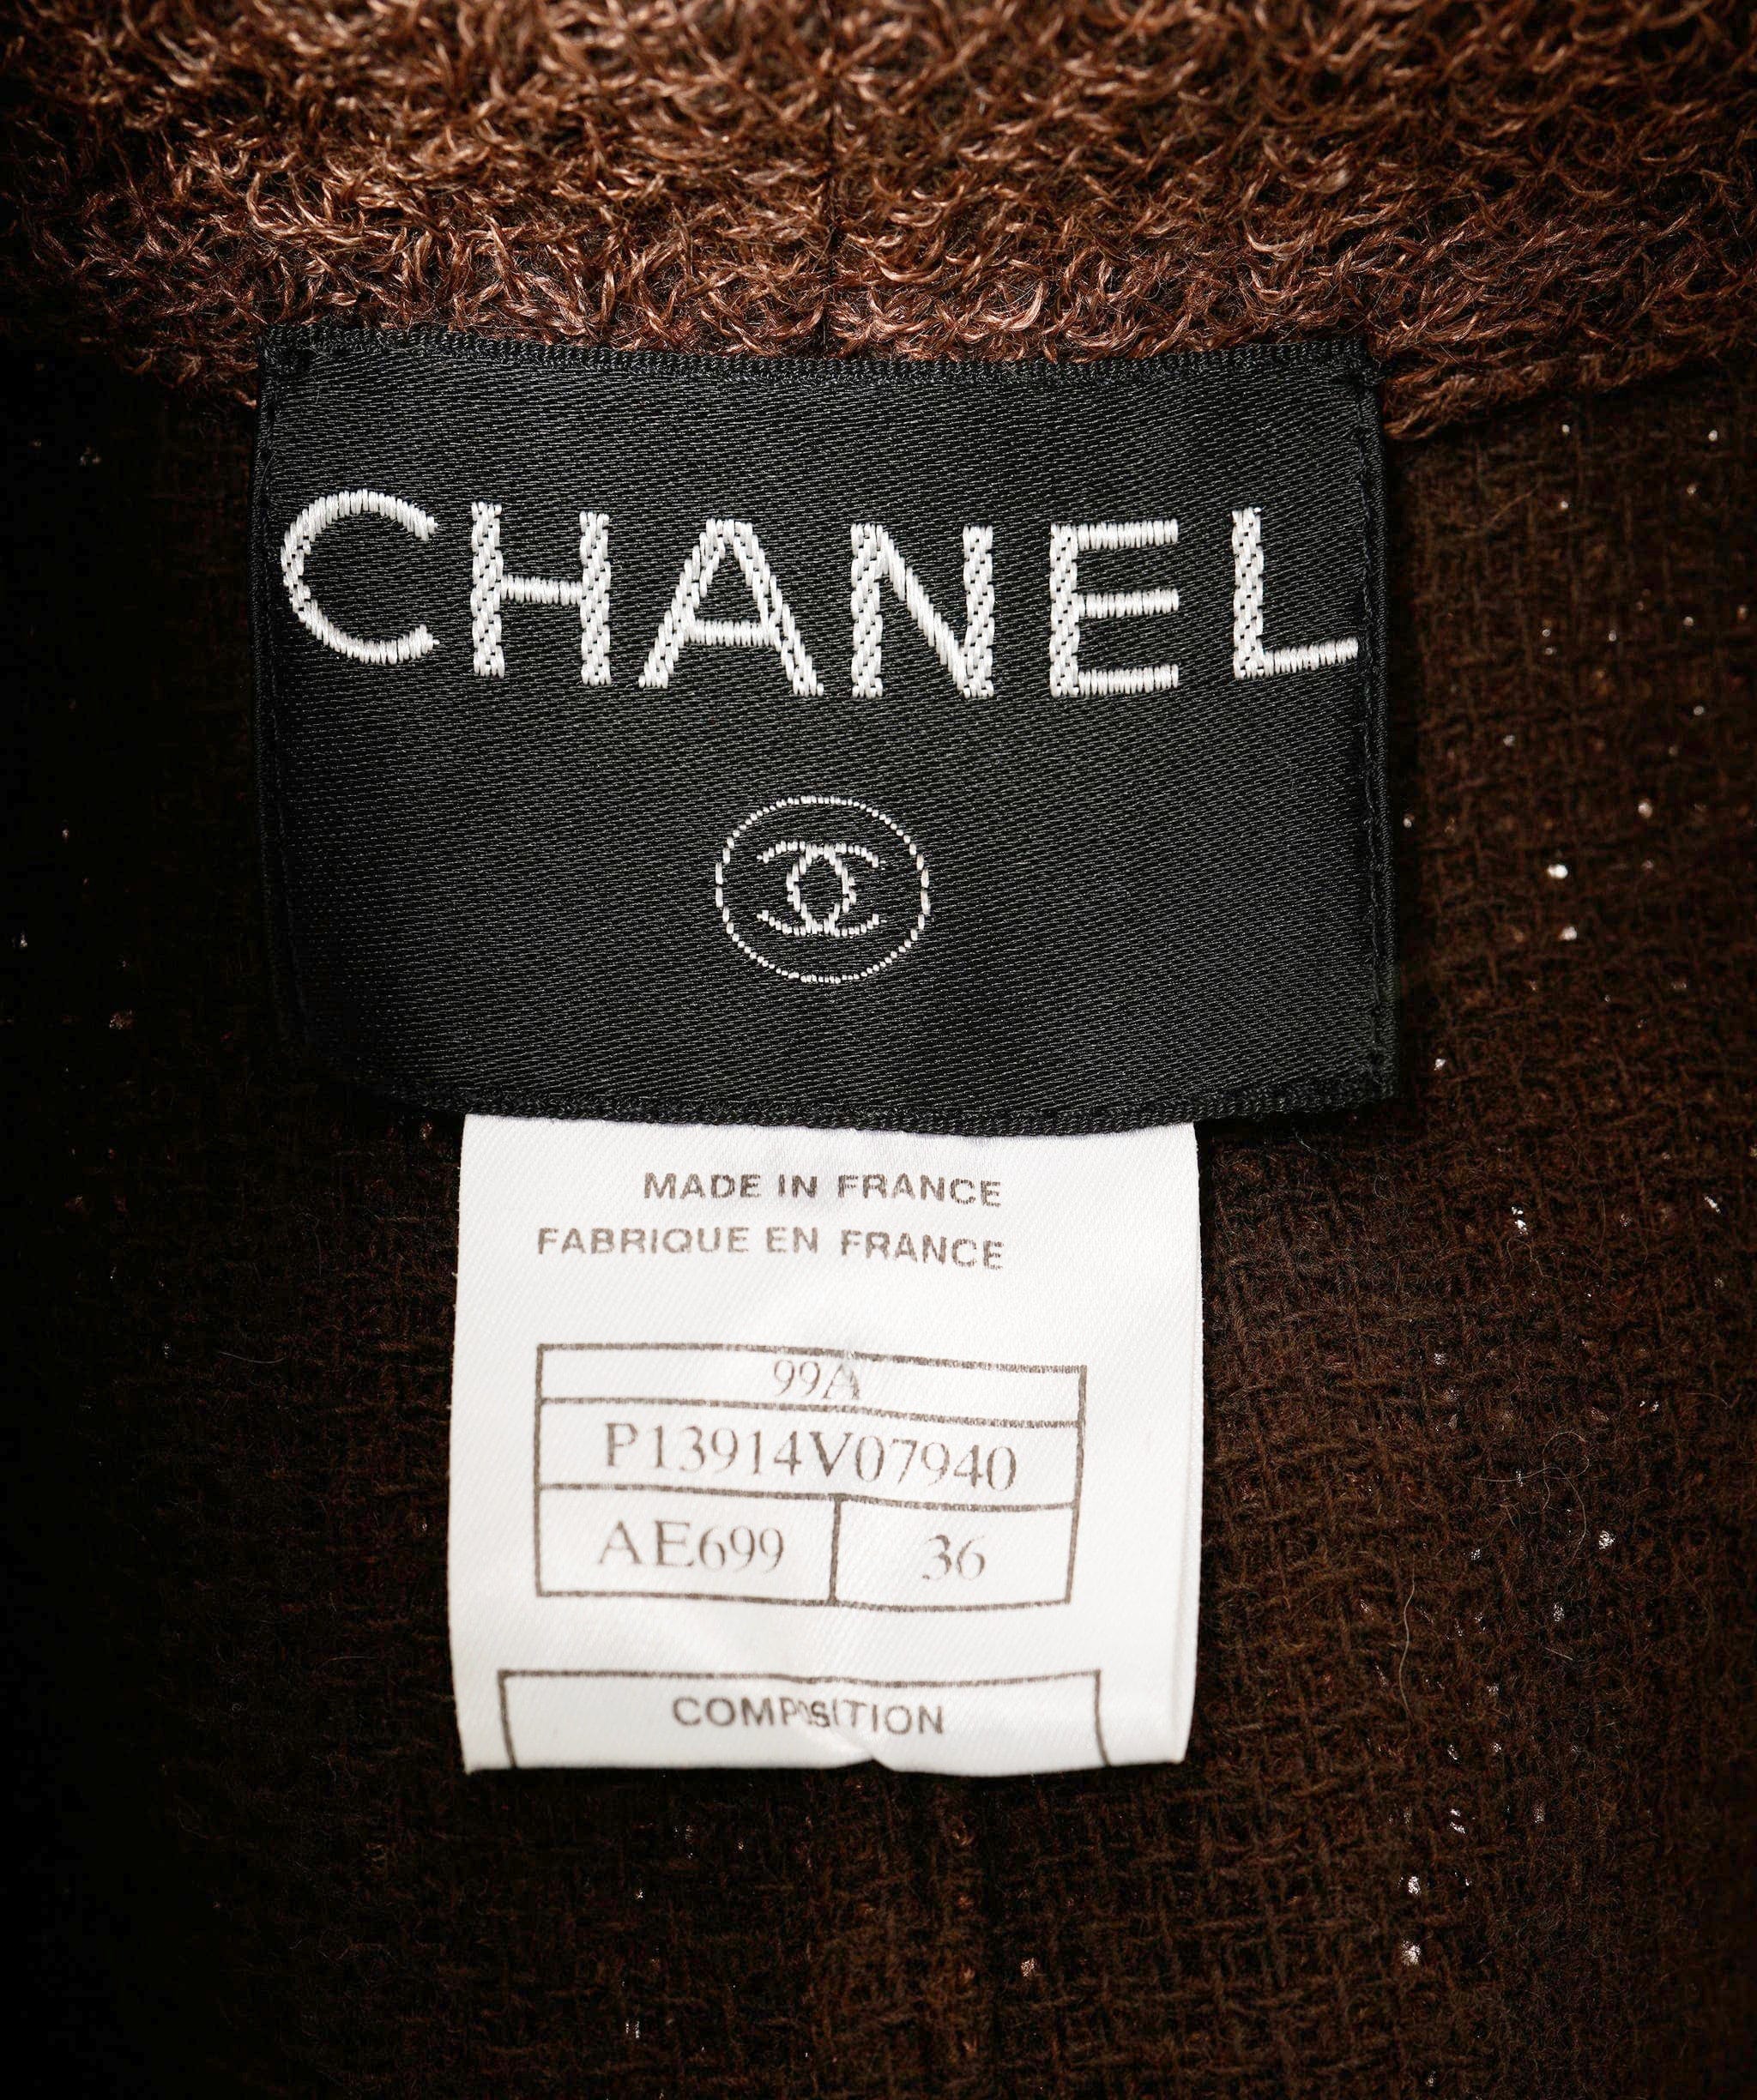 Chanel Chanel Brown Wool and Mohair Maxi Coat with Logo Buttons Size FR 36 (UK 8) ASL9734